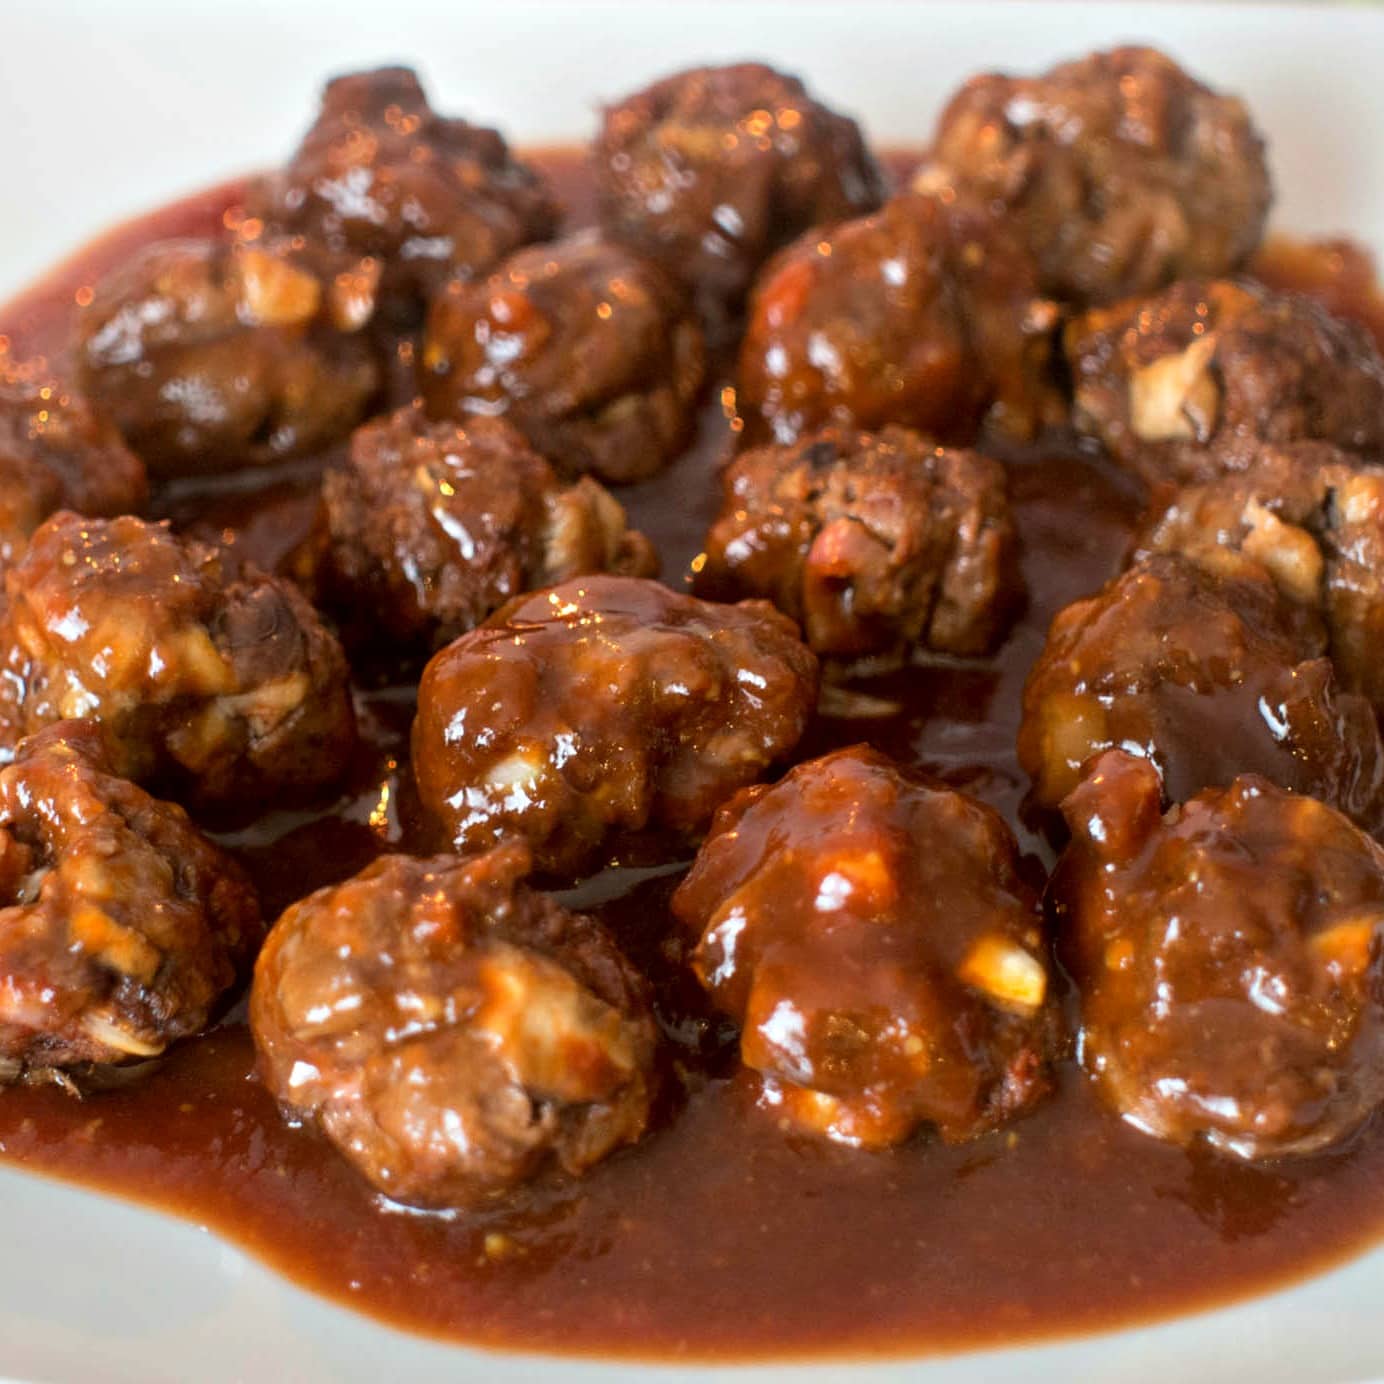 Sweet and Sour Meatballs - An Asian Themed Appetizer - easy to make meatballs using ground beef and mushrooms in a sweet and sour sauce - perfect for a party or just for a family dinner.